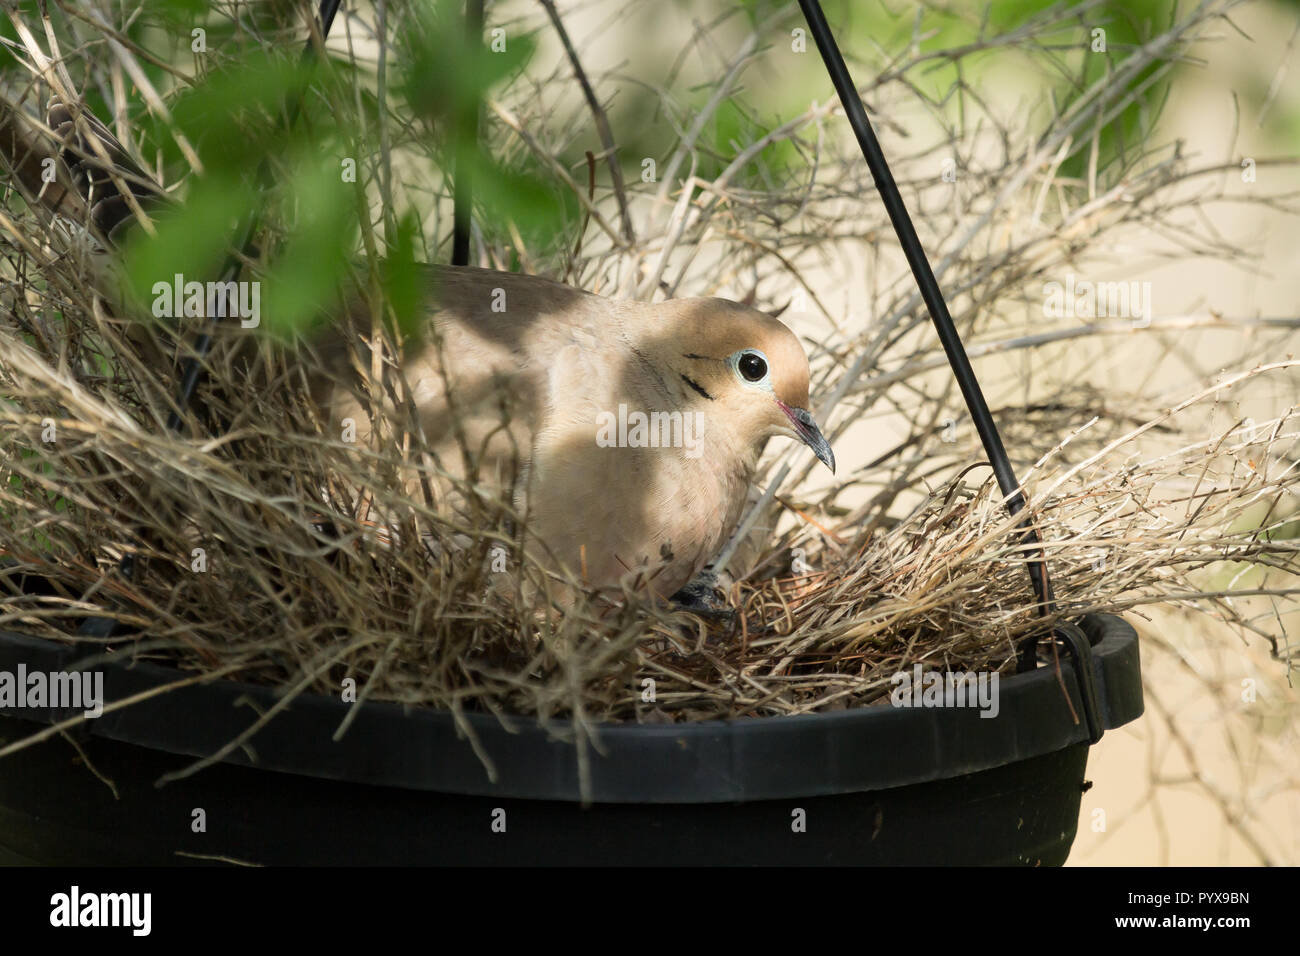 A female Mourning Dove sits on her nest that she has constructed in a potted plant container. Stock Photo